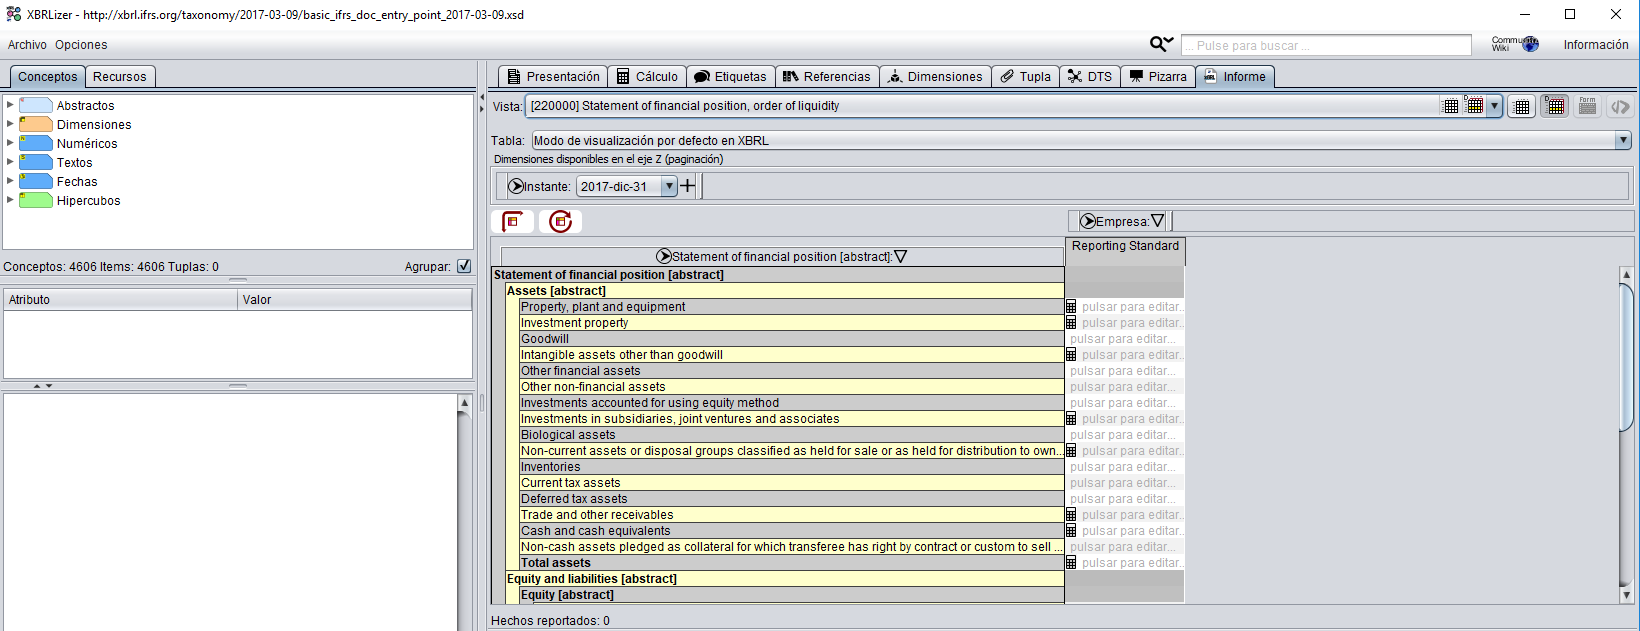 Download XBRL software on this page- Sample screenshot of RS XBRL software suite - XBRLizer